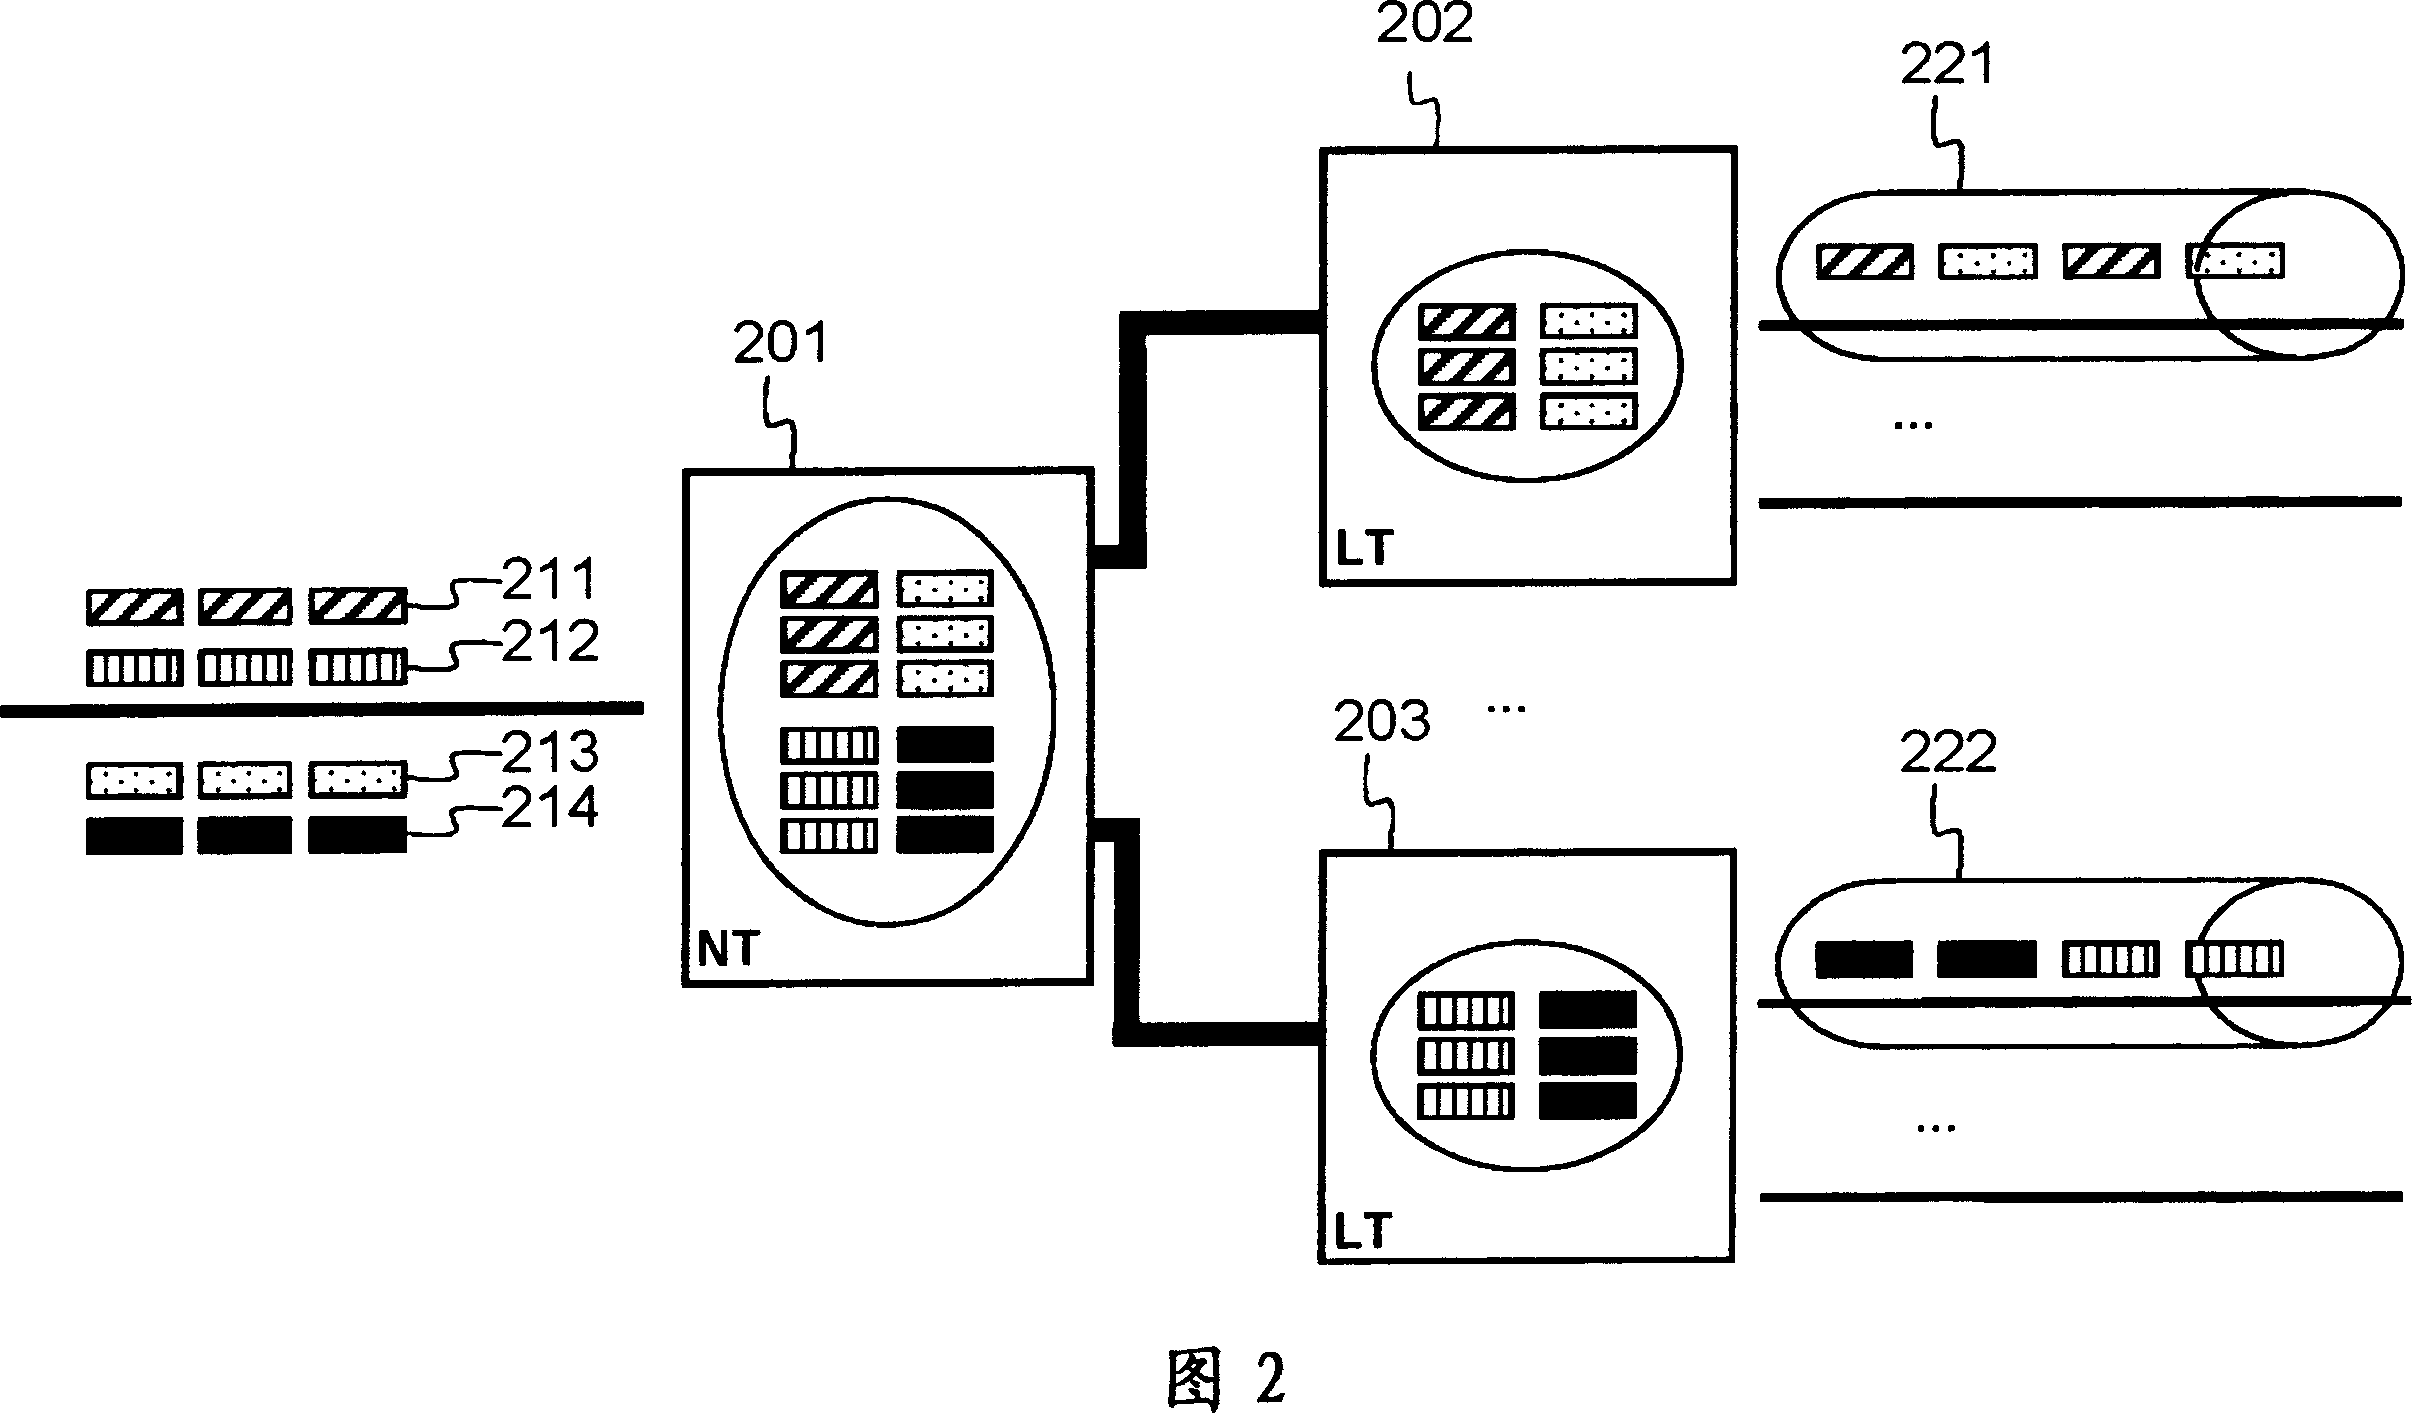 Transmission control protocol host with transmission control protocol convergence module